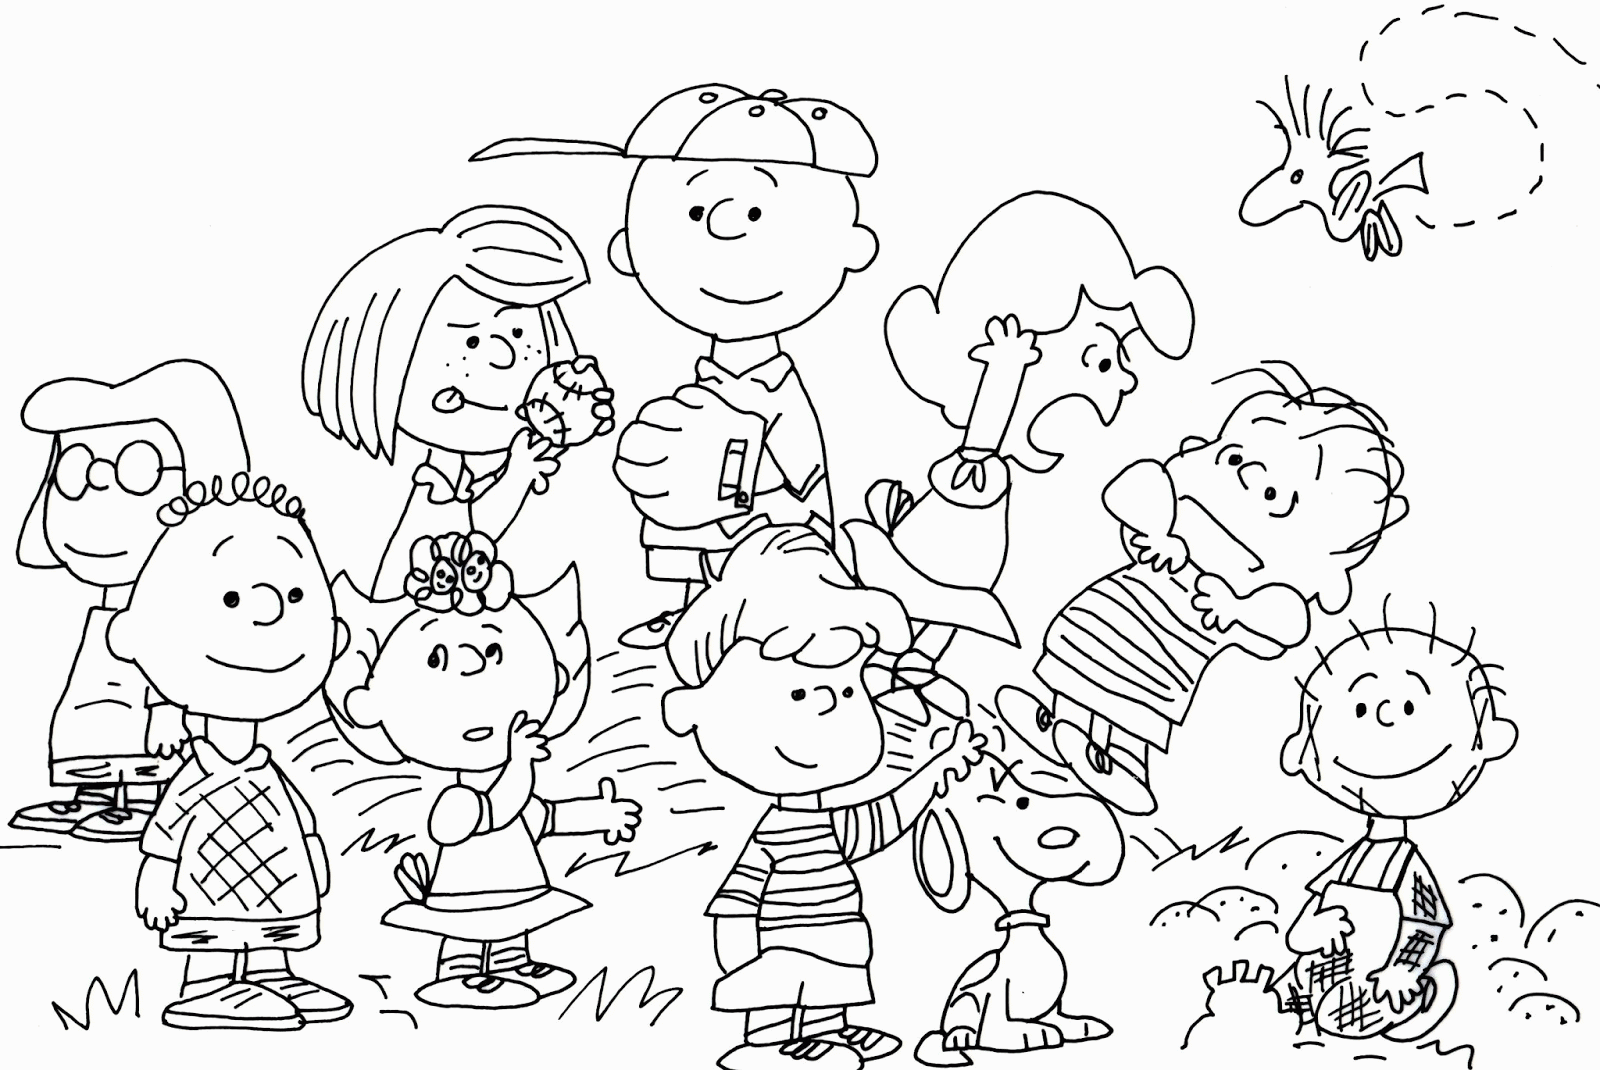 Peanuts Characters Thanksgiving Coloring Pages - Coloring Home